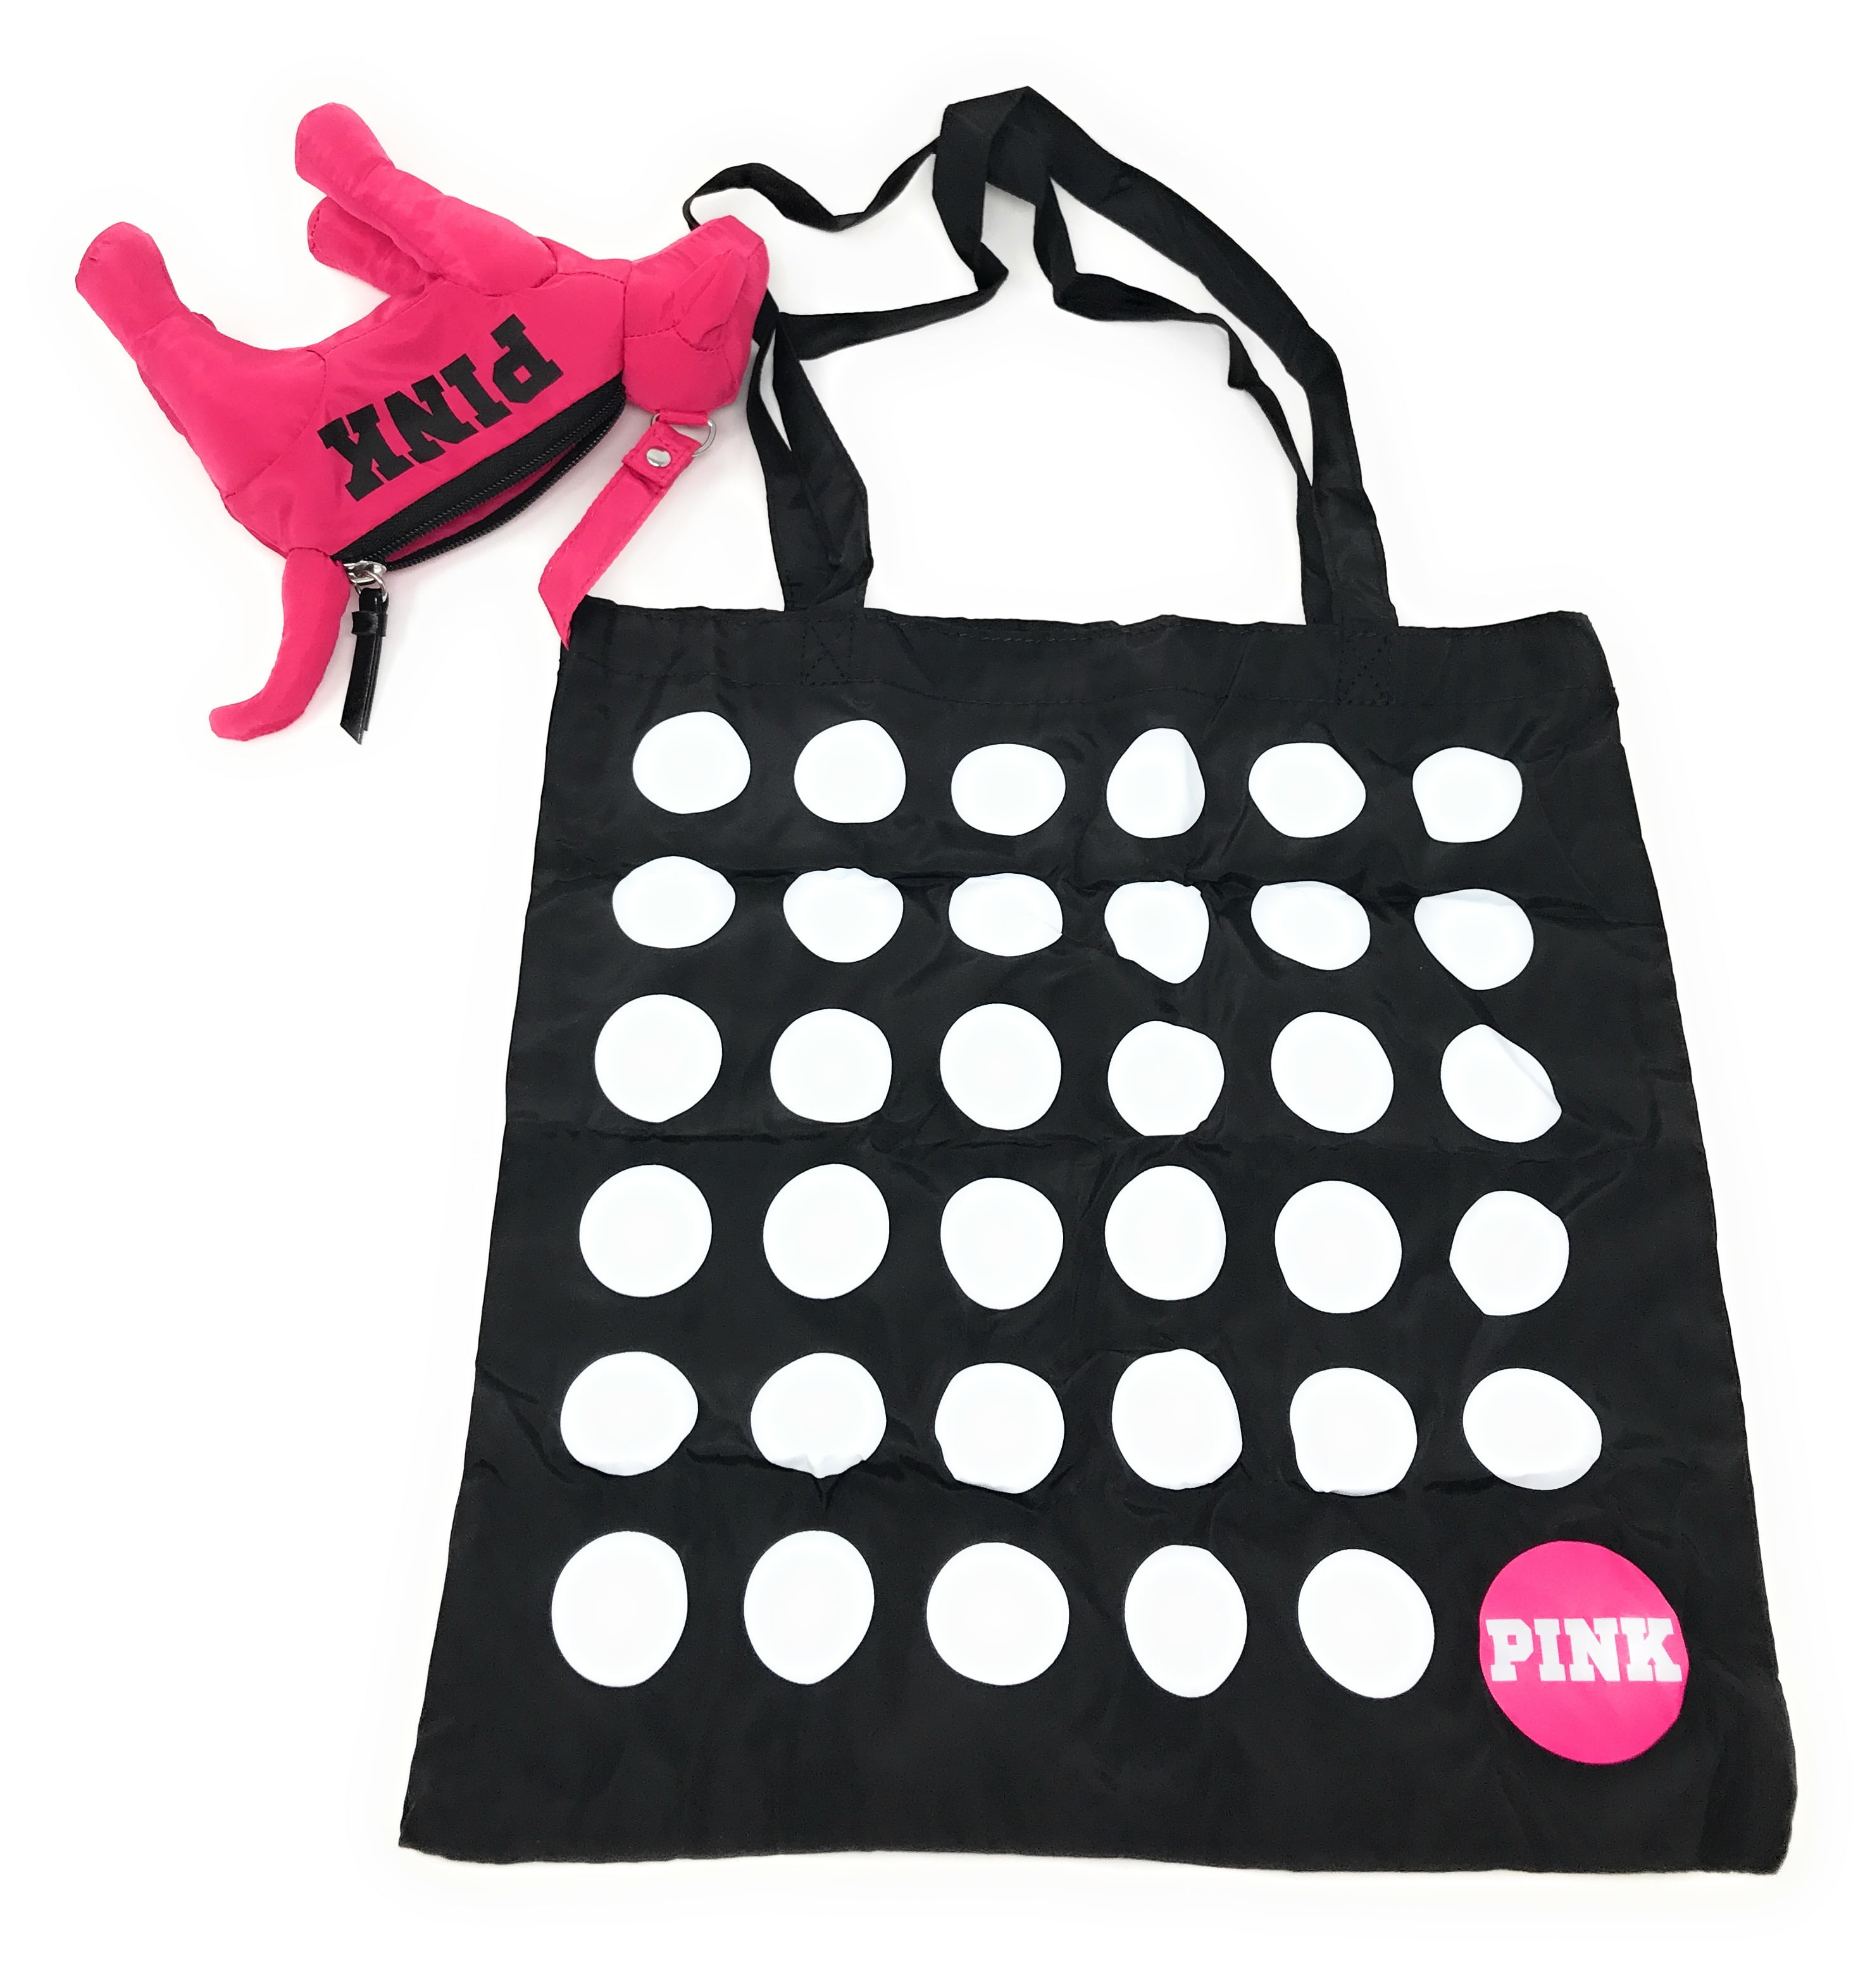 New Victoria/'s Secret PINK Mini Dog And Packable Dot Convertible Tote Bag